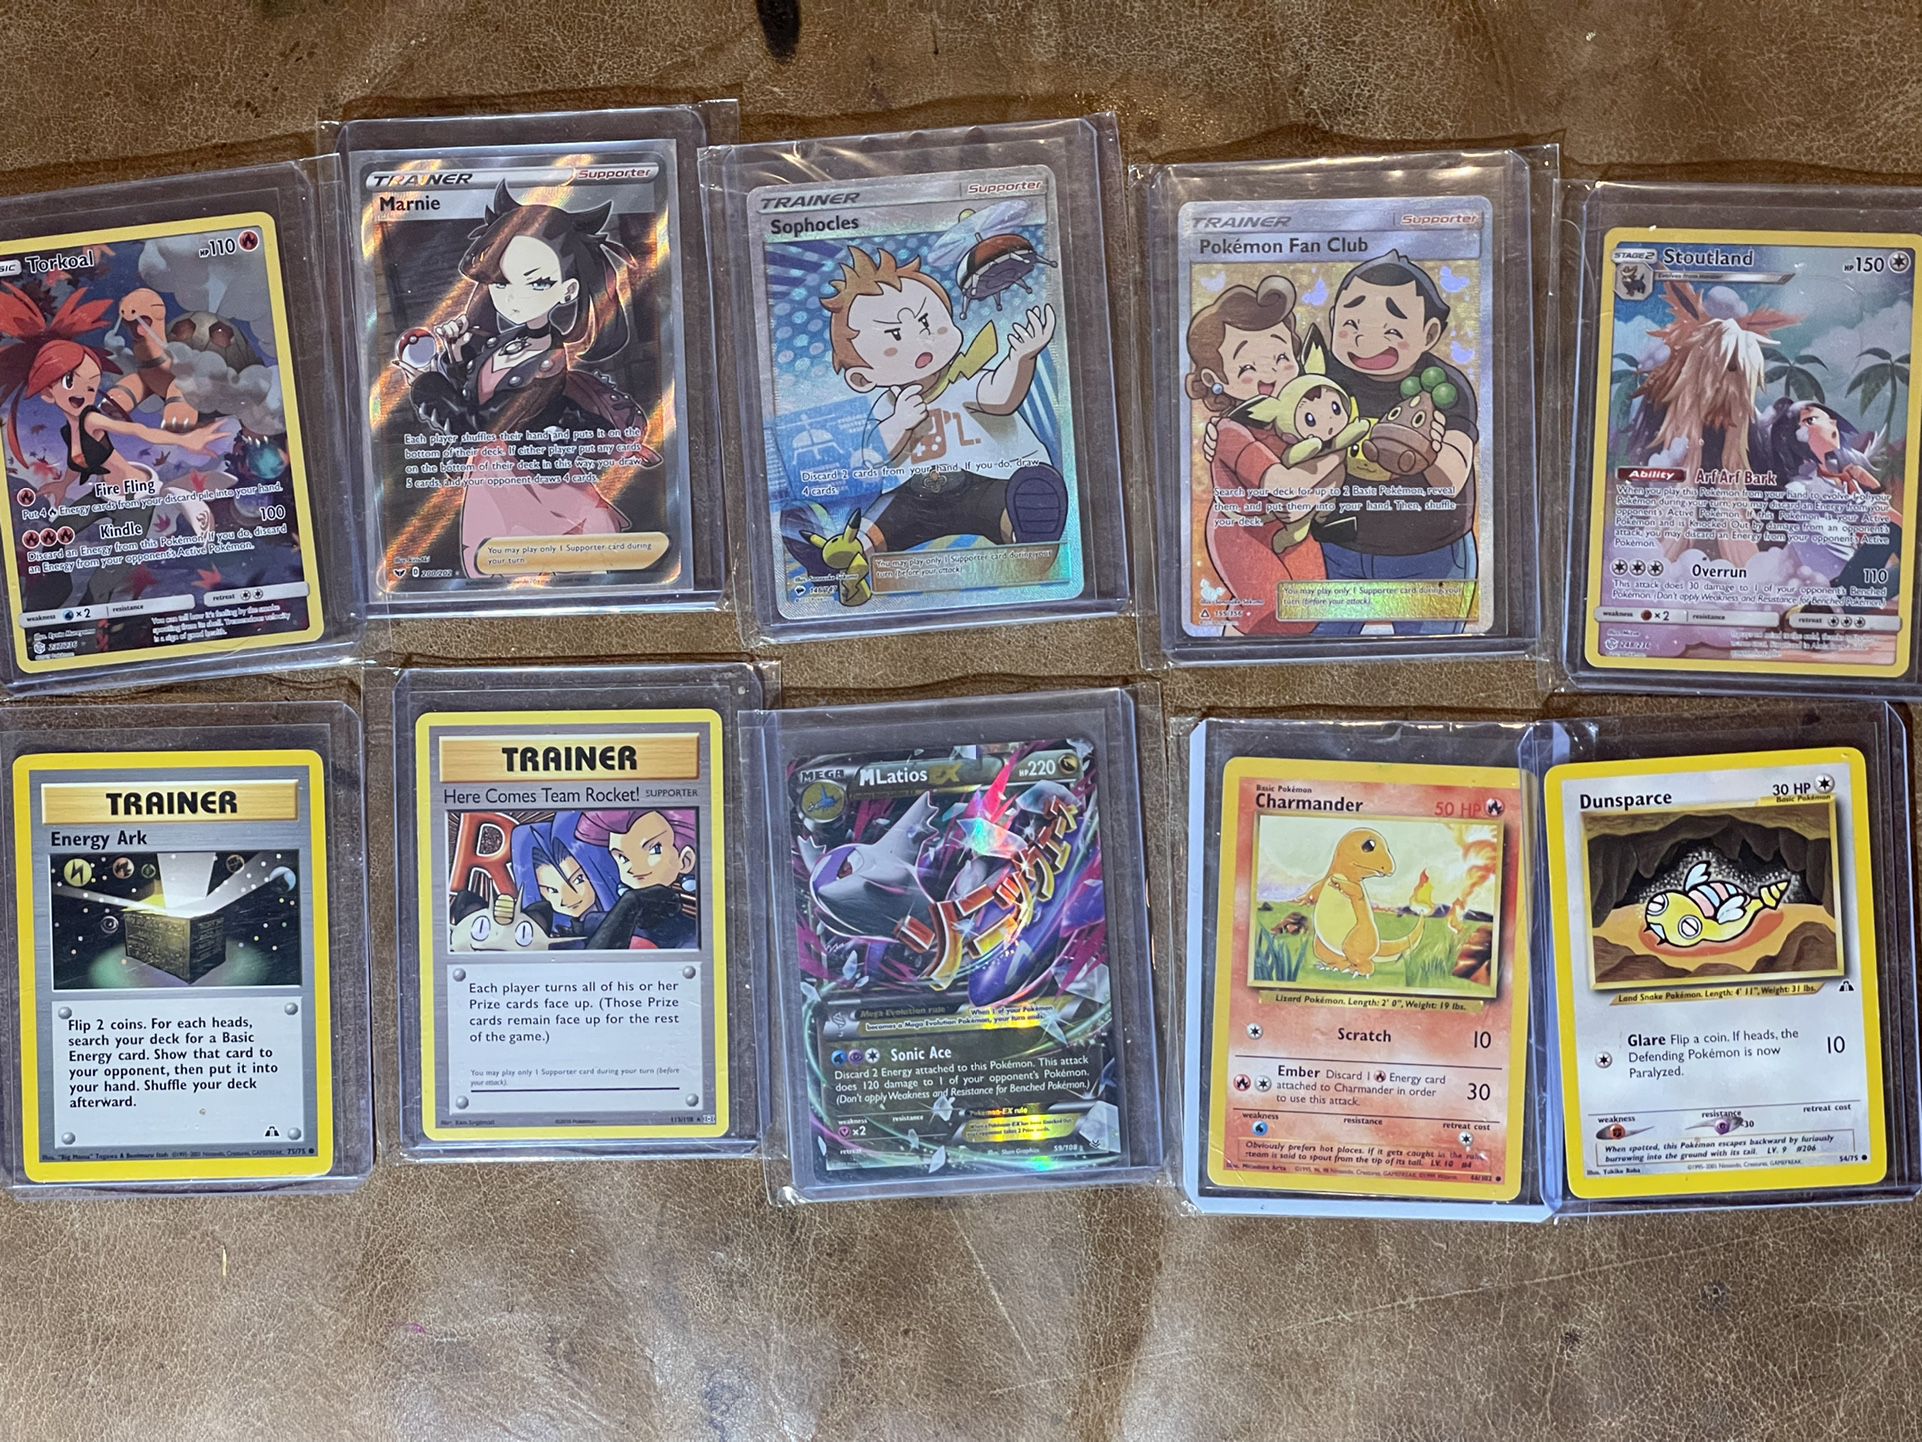 POKÉMON CARD COLLECTION WITH HOLOS, FULL ART, SECRET RARE CARDS & MORE